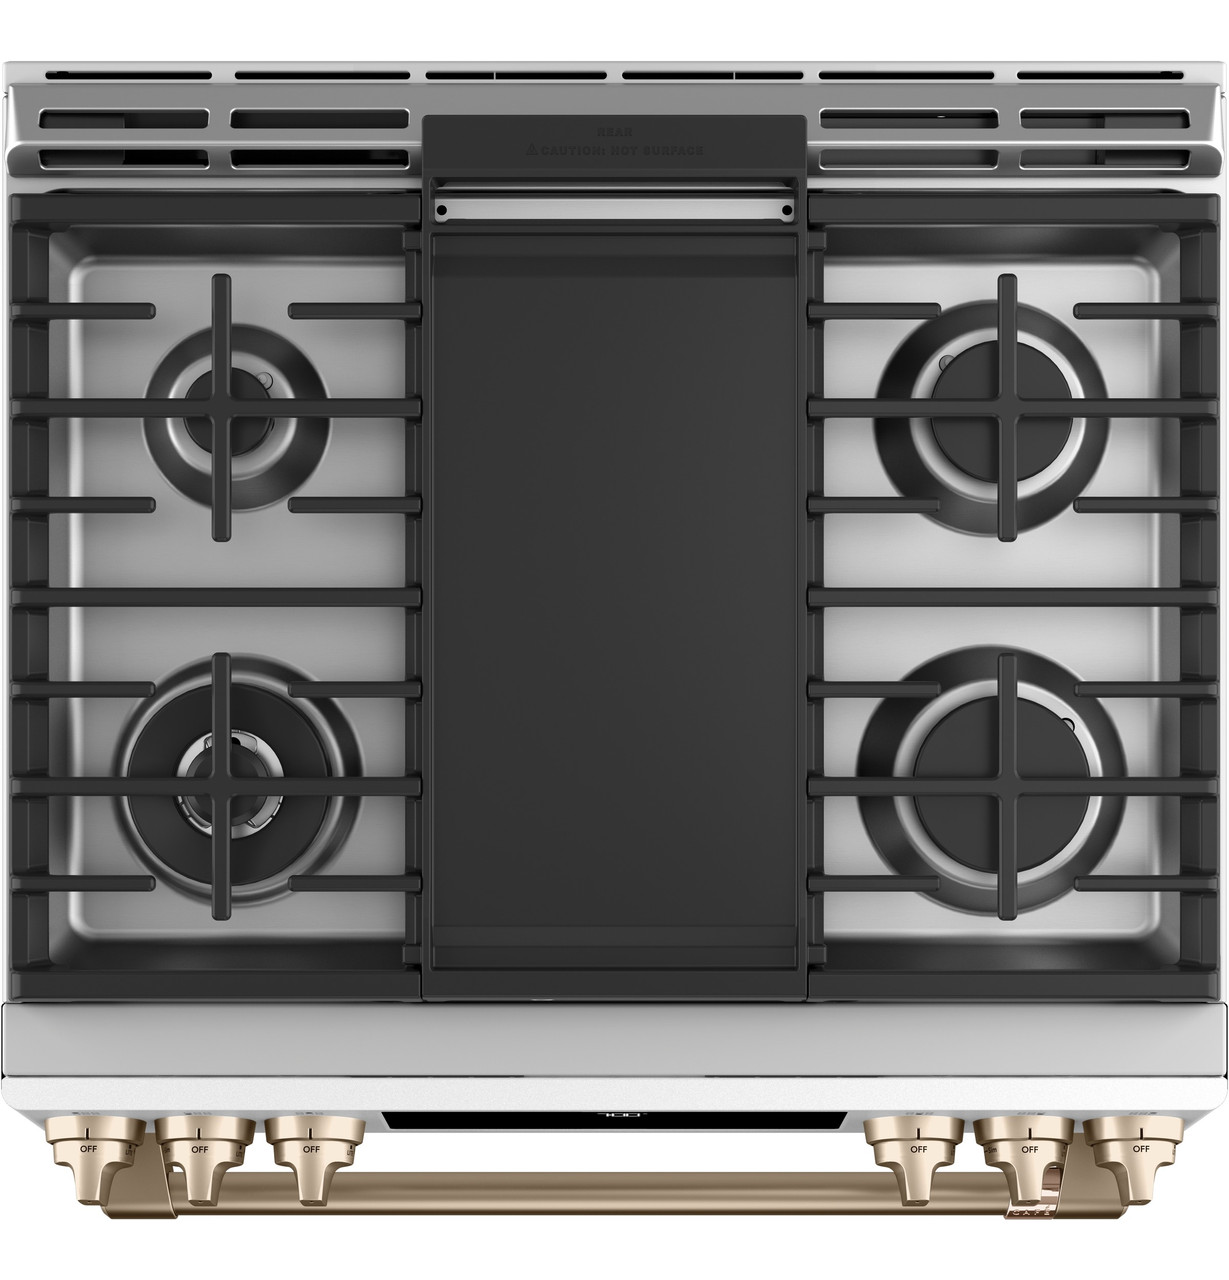 Café™ 30 Smart Slide-In, Front-Control, Radiant and Convection